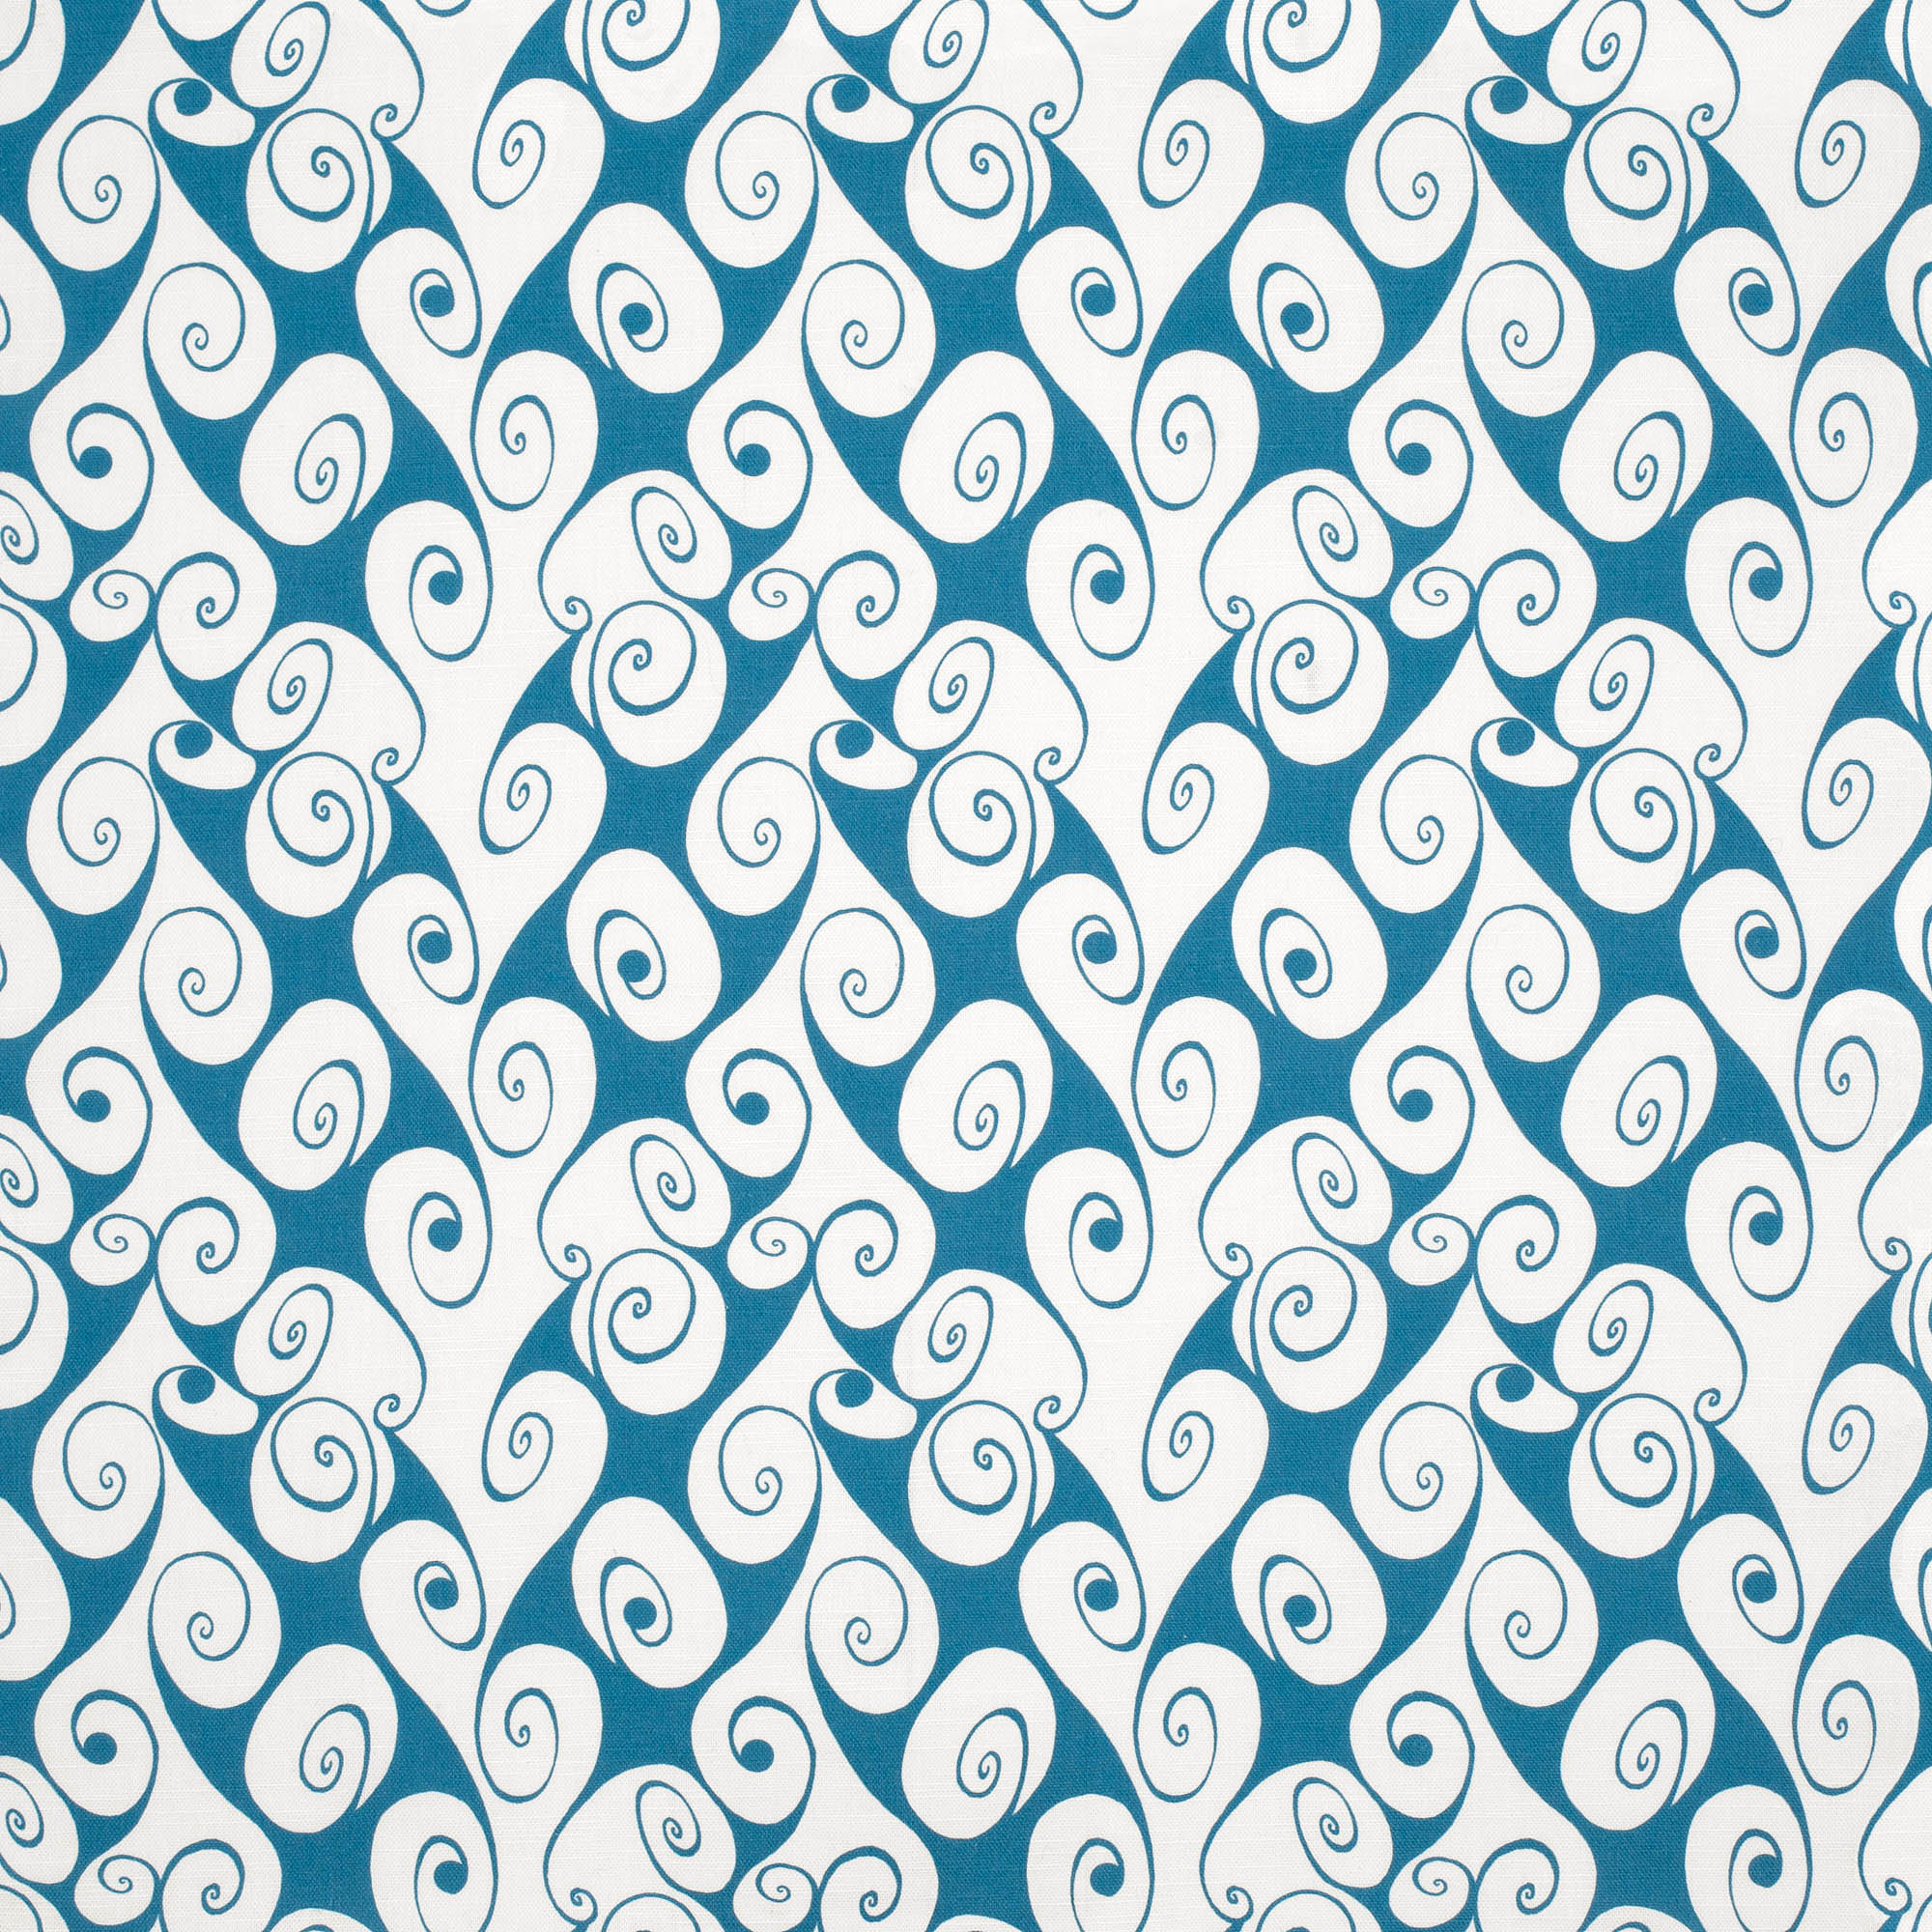 Detail of fabric in a playful abstract shape print in white on a blue field.